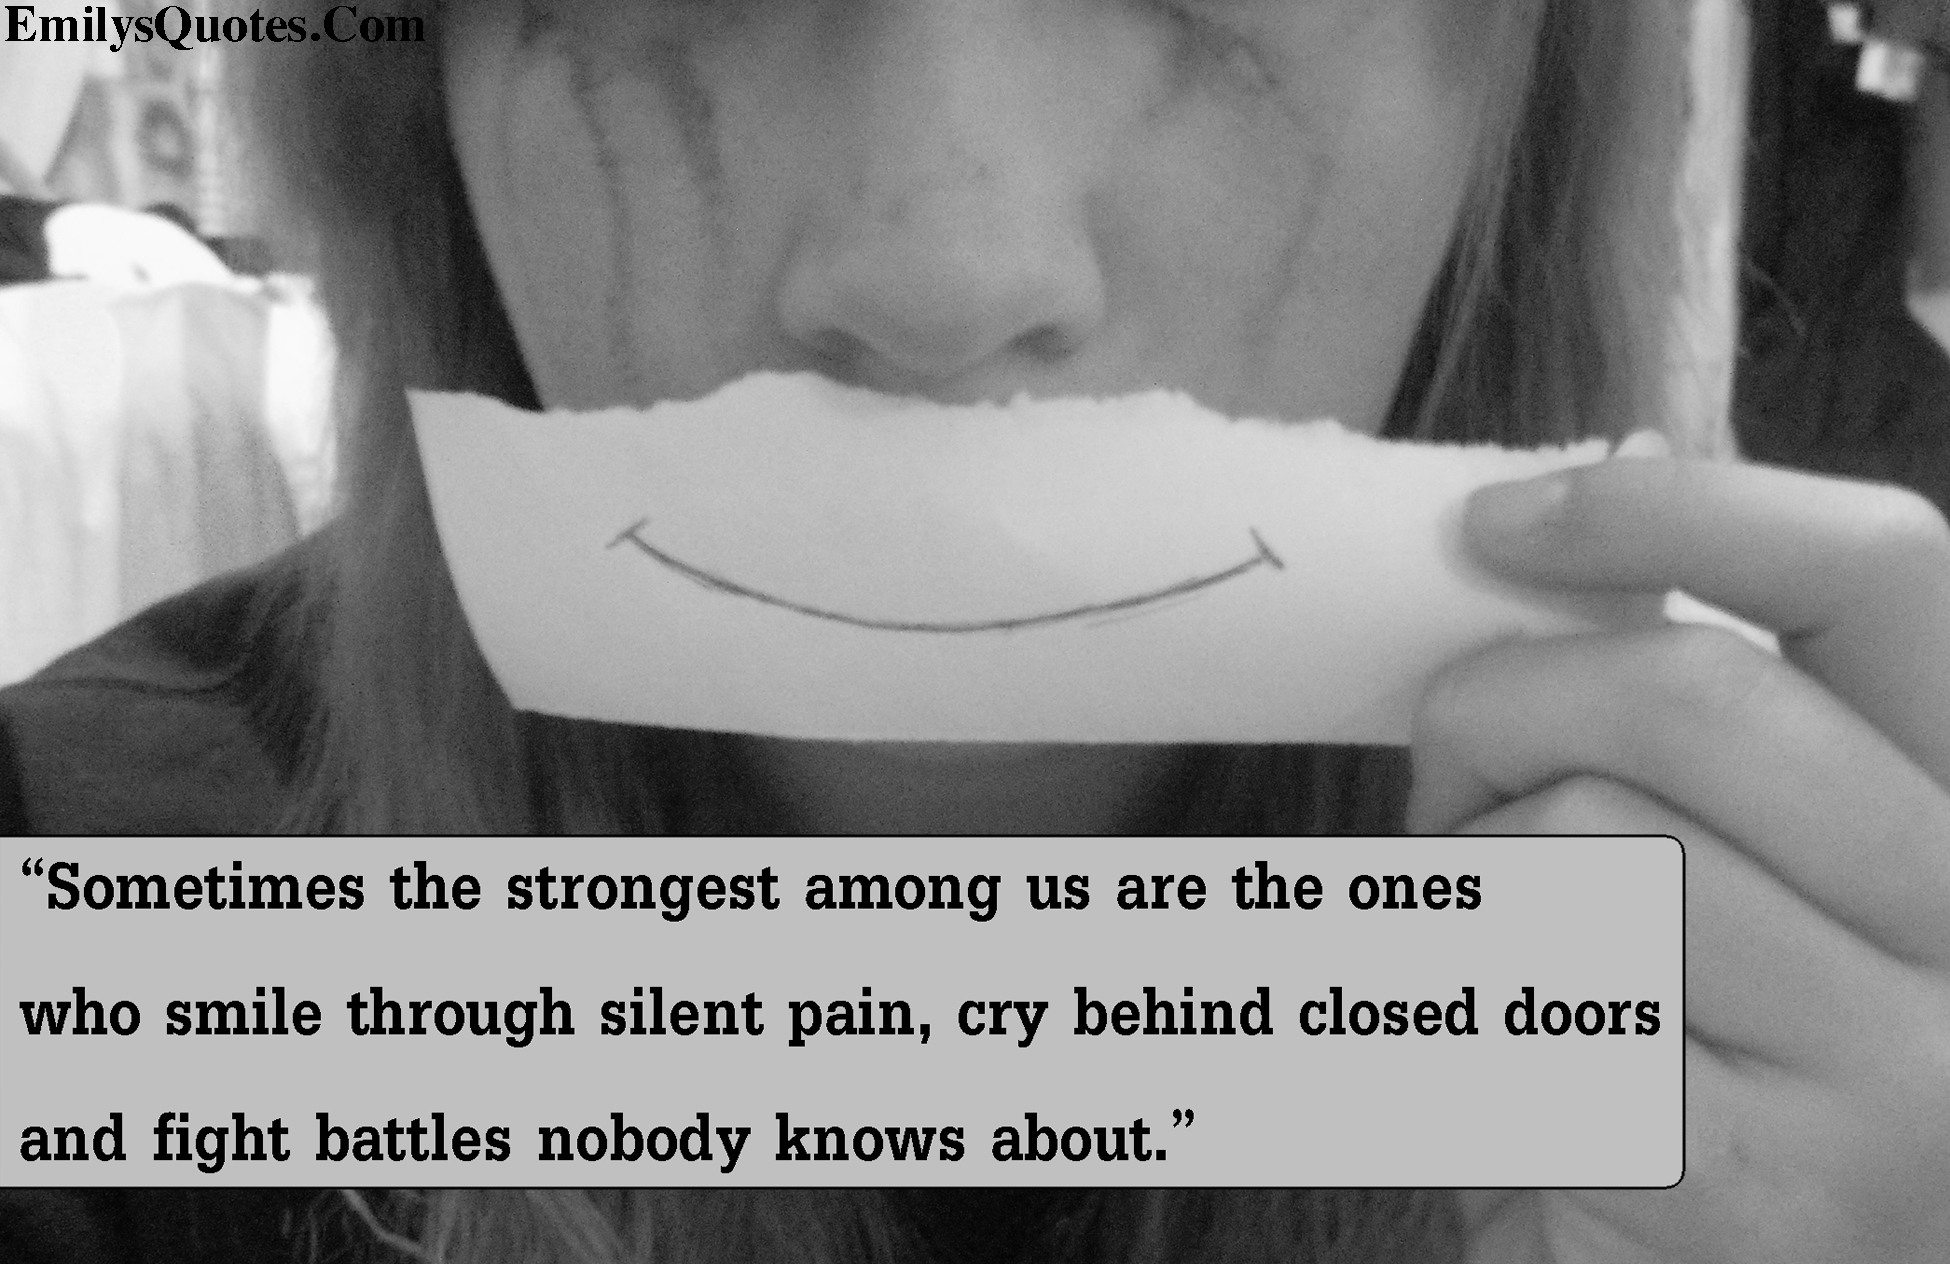 Sometimes the strongest among us are ones who smile through silent pain, cry behind closed doors, and fight battles nobody knows about